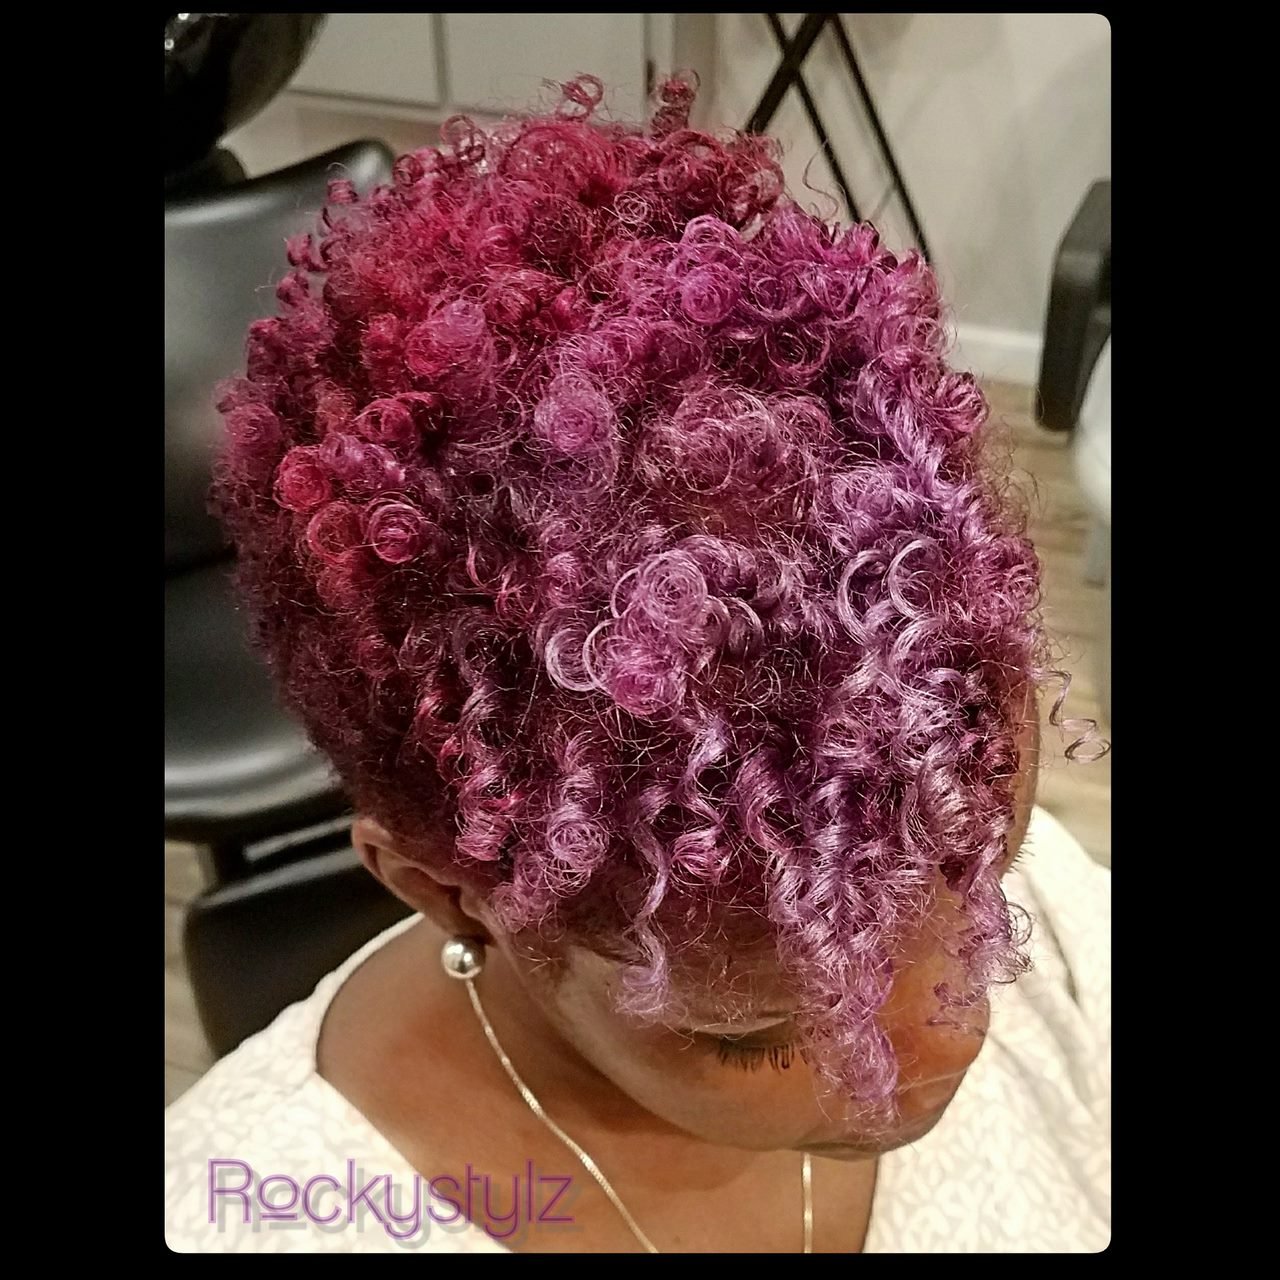 RockyStylz @ Haywood's Hair Images – VA 23225, 2201 Semmes Ave Suite B ...